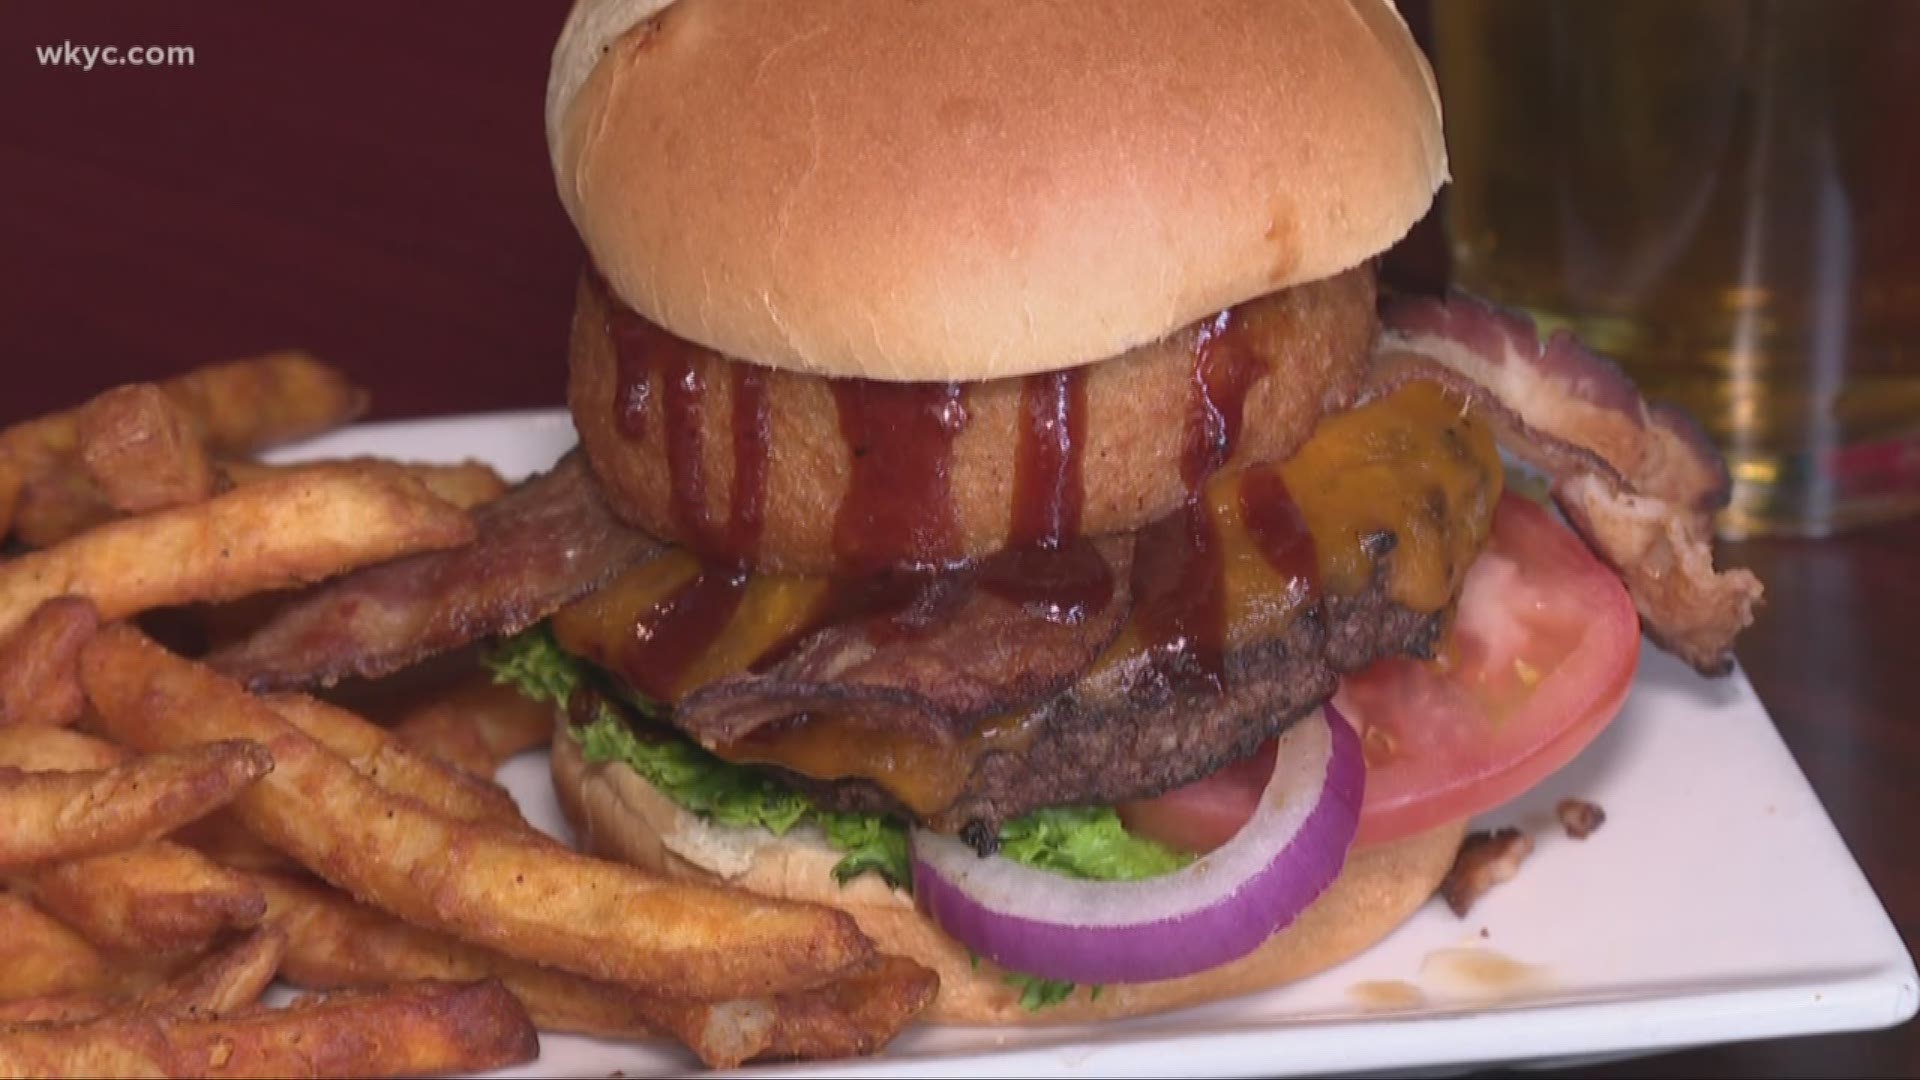 March 28, 2019: Looking for a cool place to visit that's near the ballpark? WKYC's Alexa Lee went out and explored some of the best sports bars in downtown Cleveland.